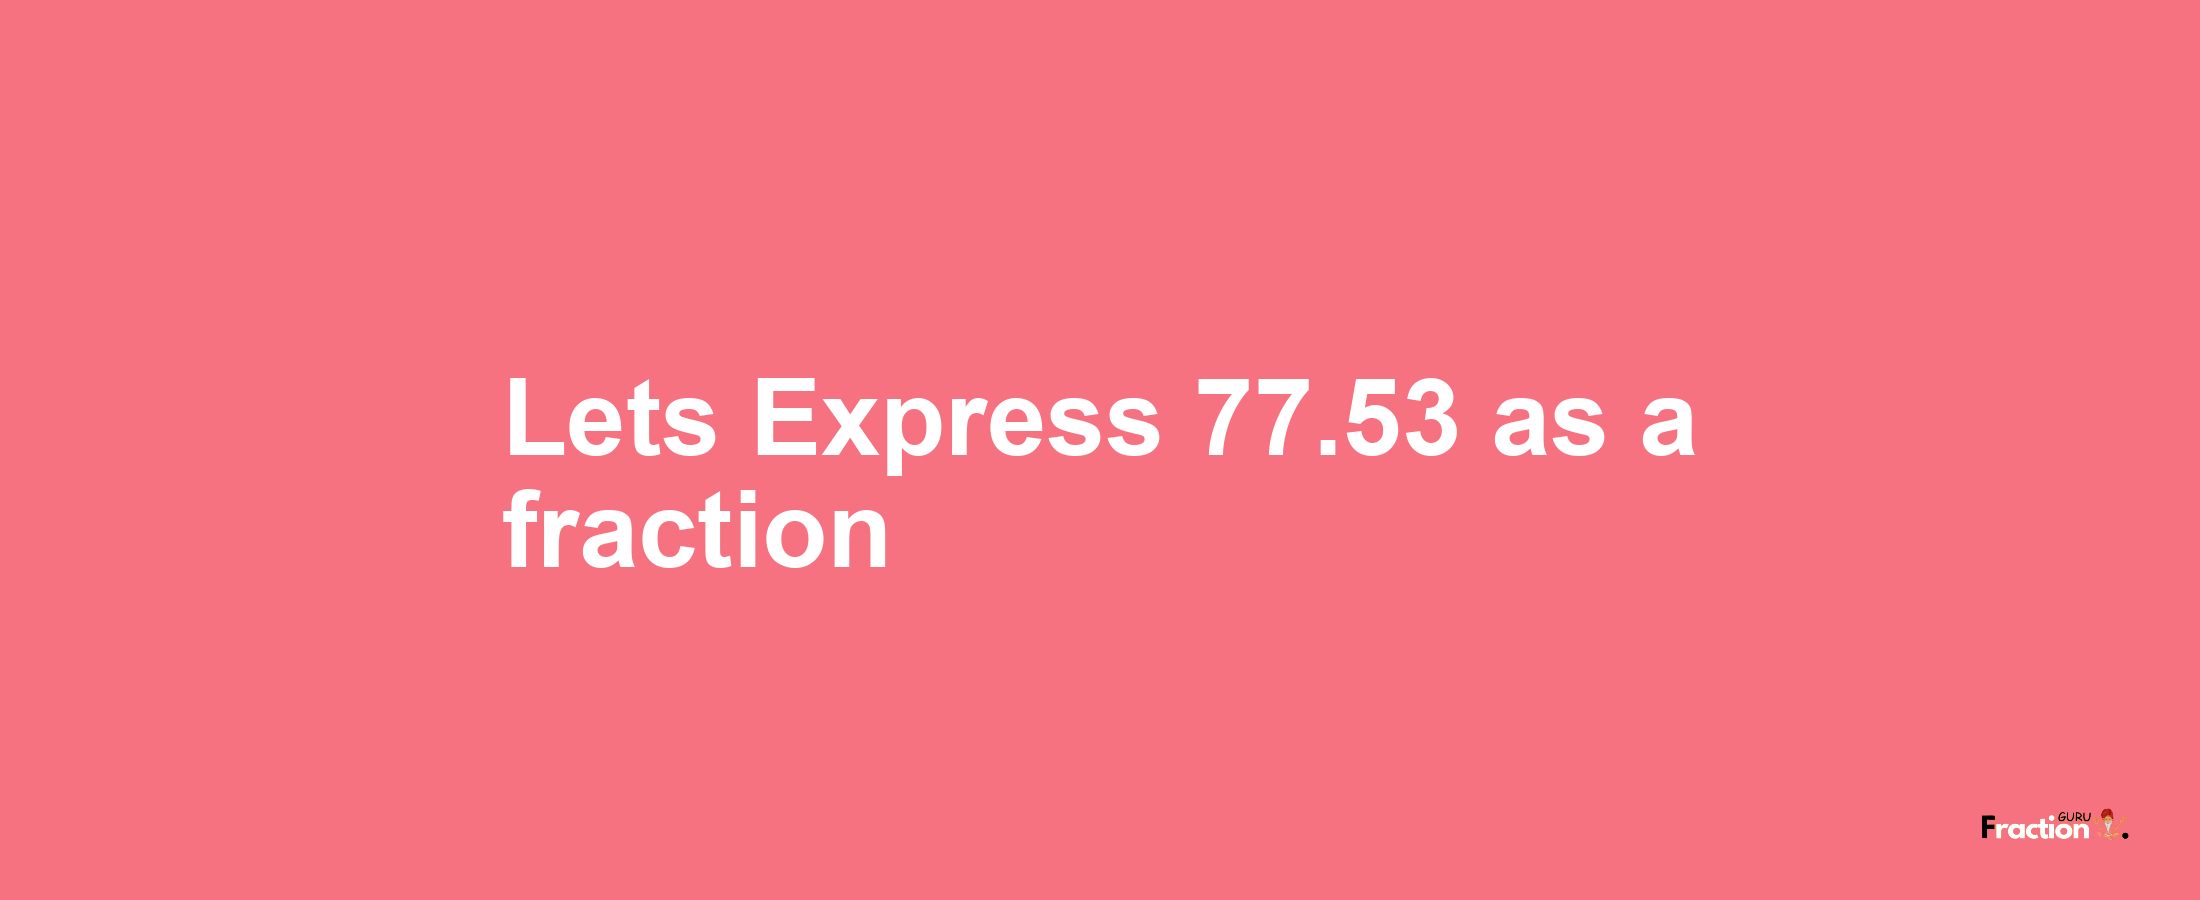 Lets Express 77.53 as afraction